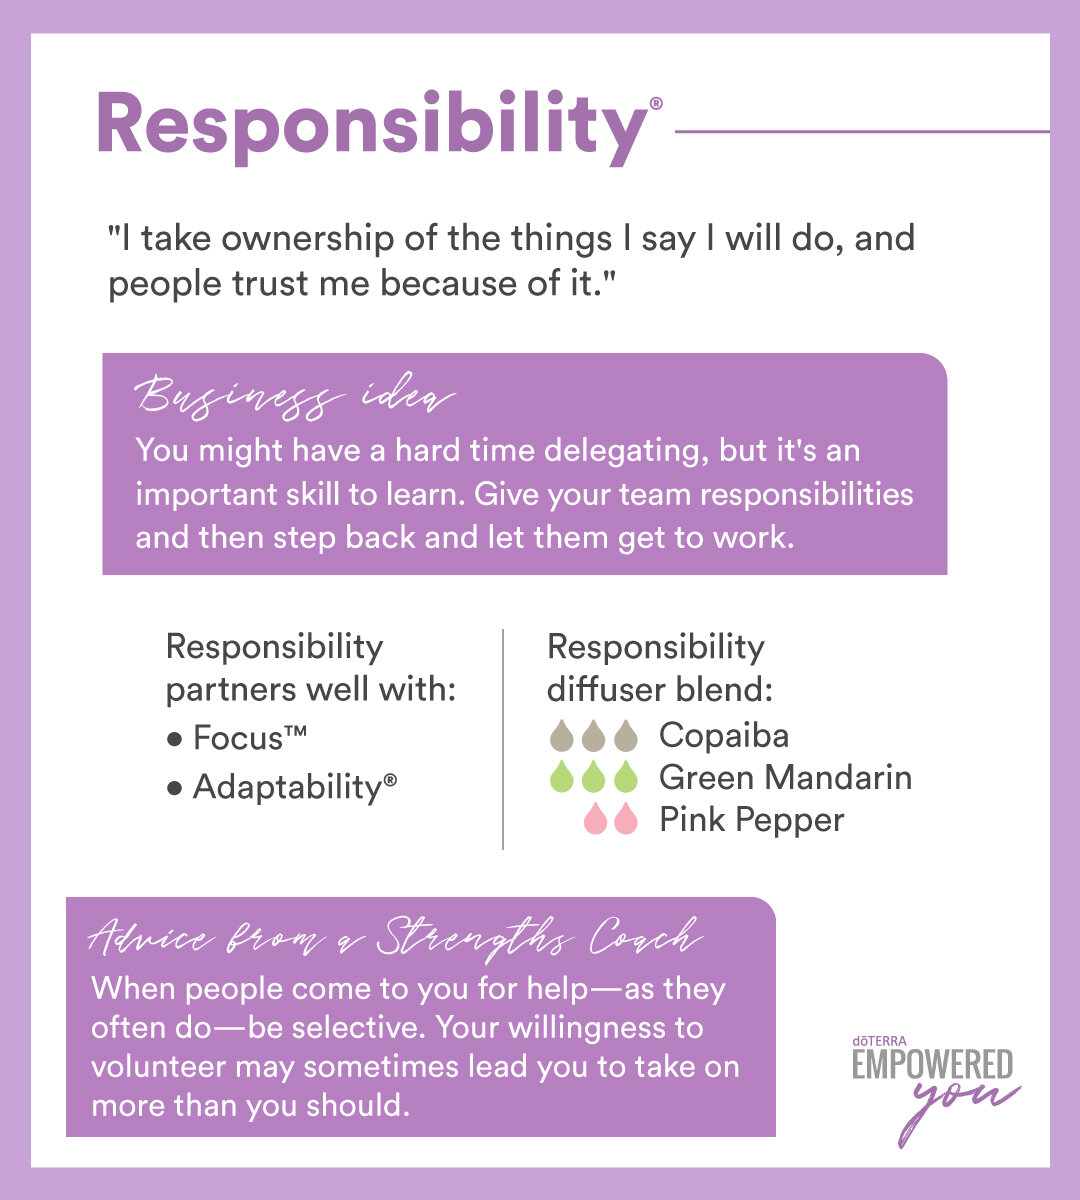 Strengths and oils-insight-Responsibility.jpg